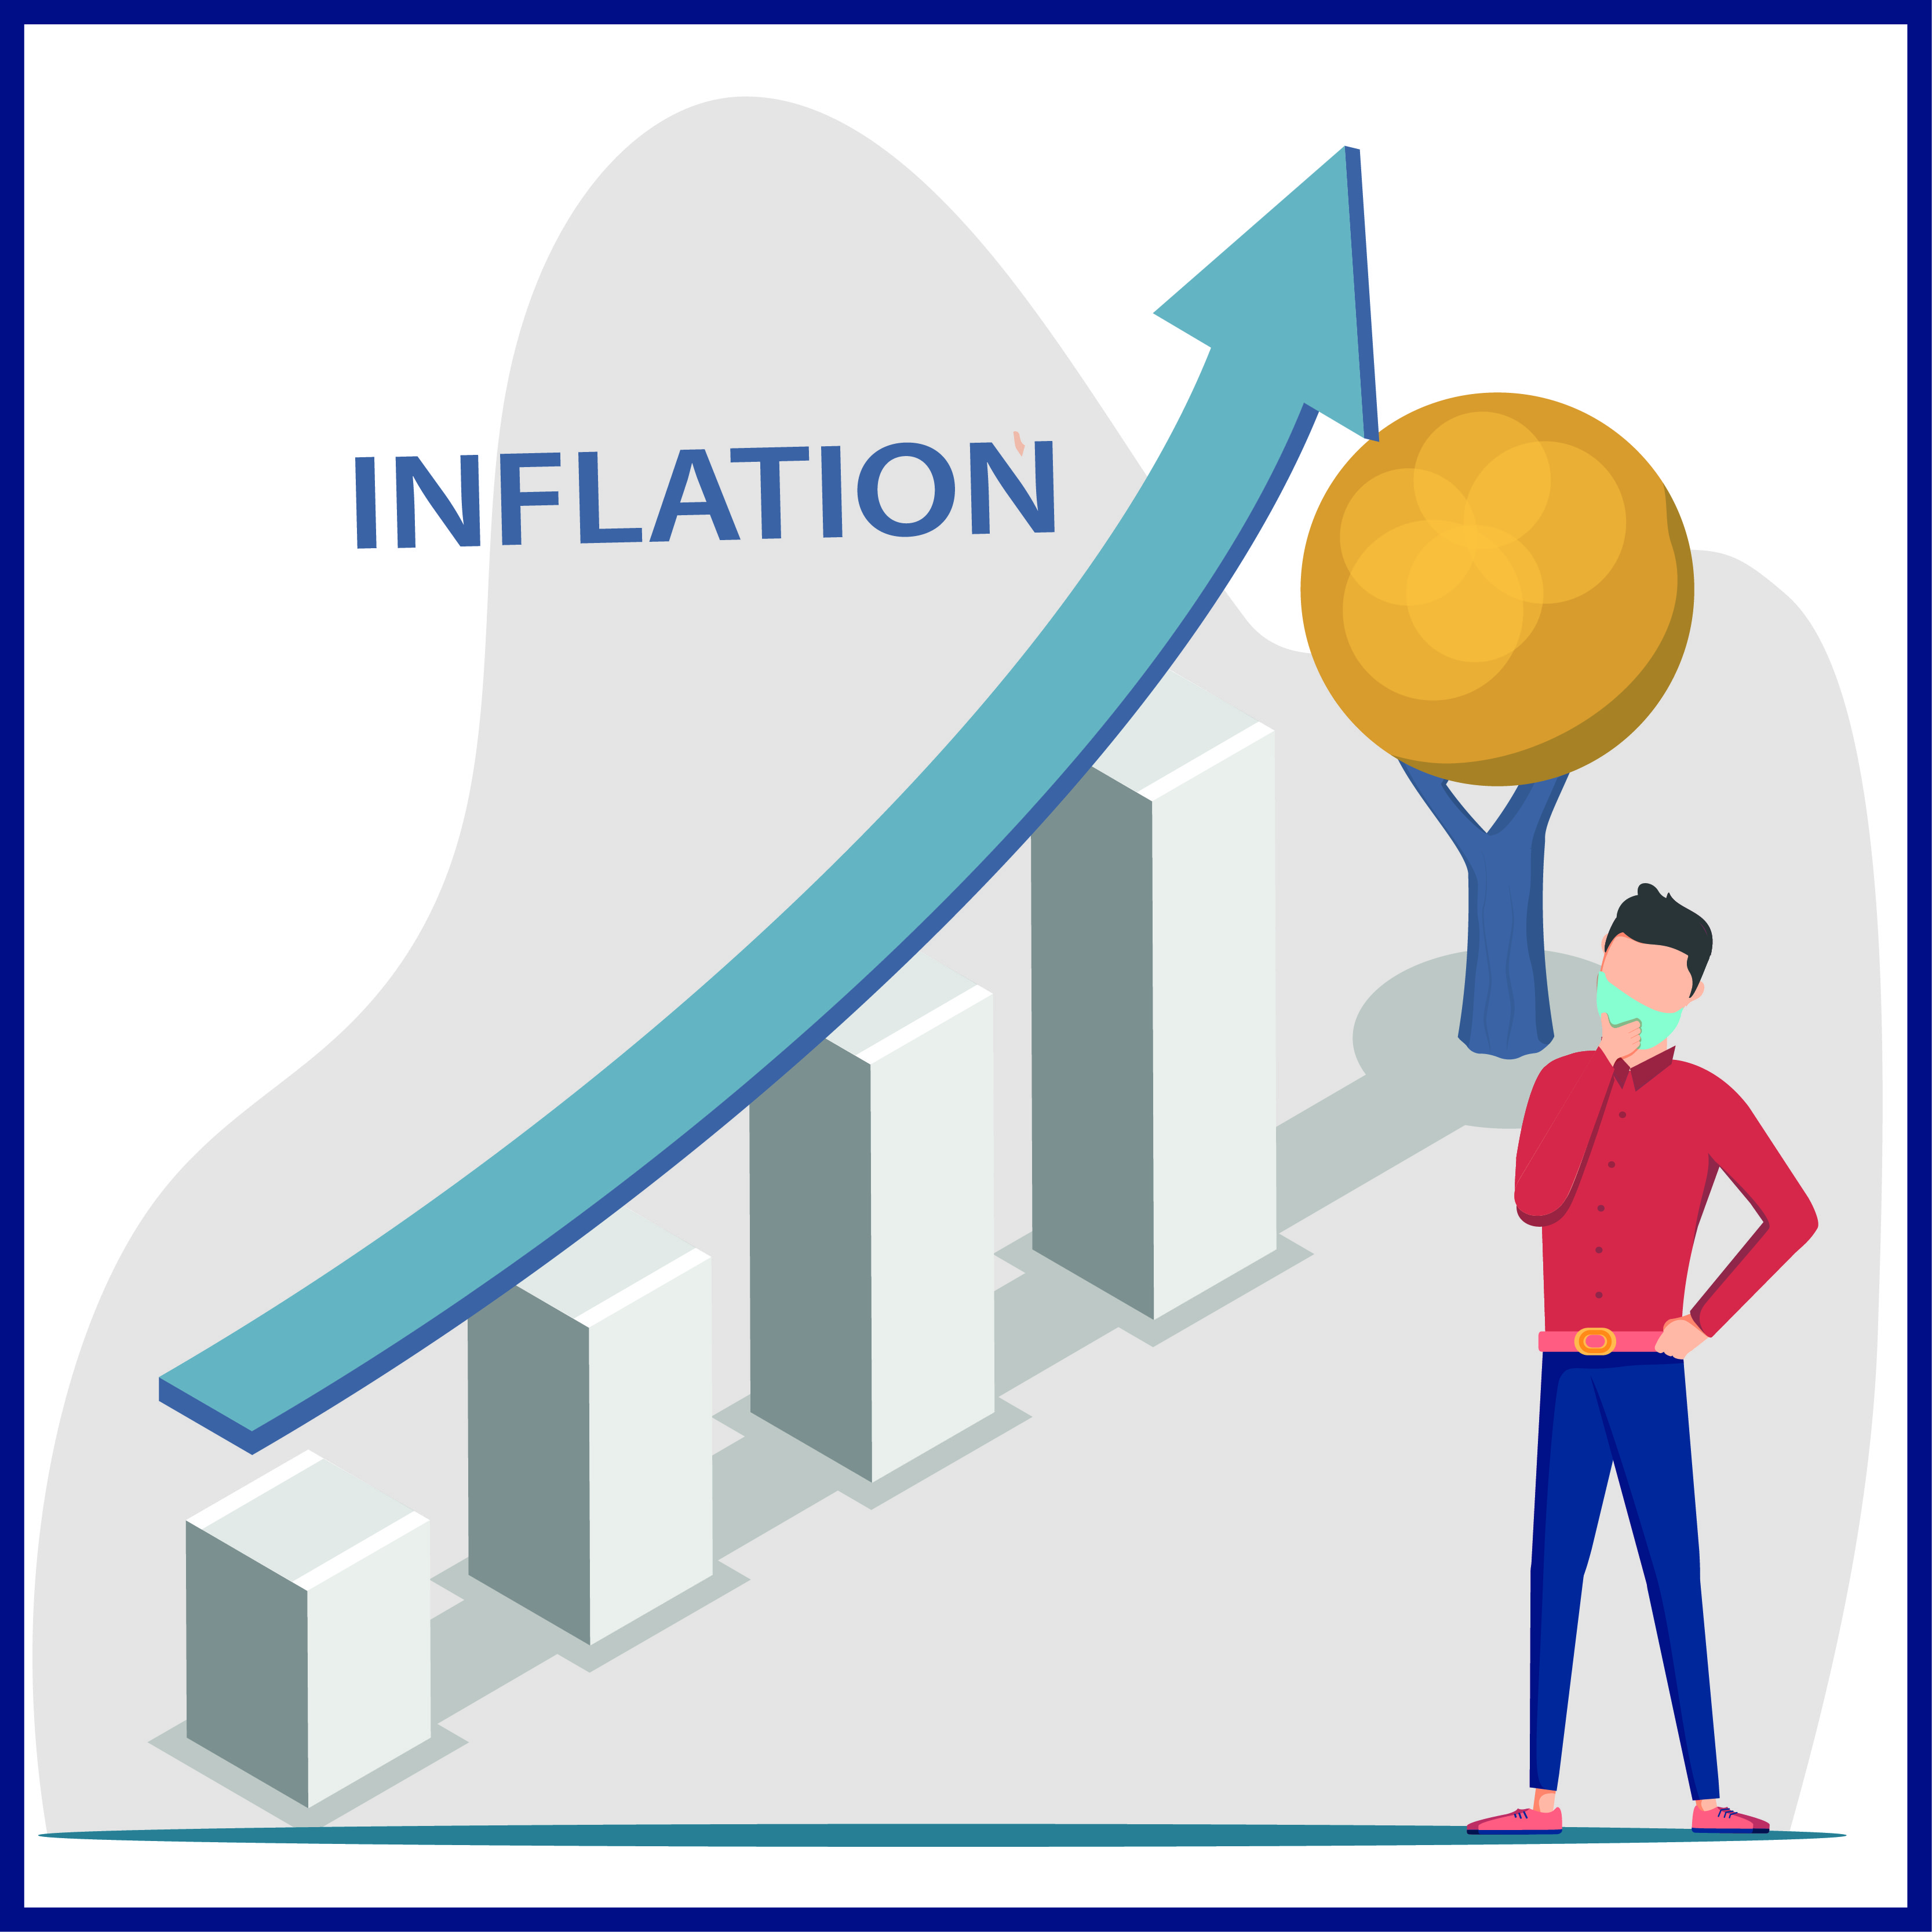 Among other negative effects, this growth is generating a significant increase in inflation.